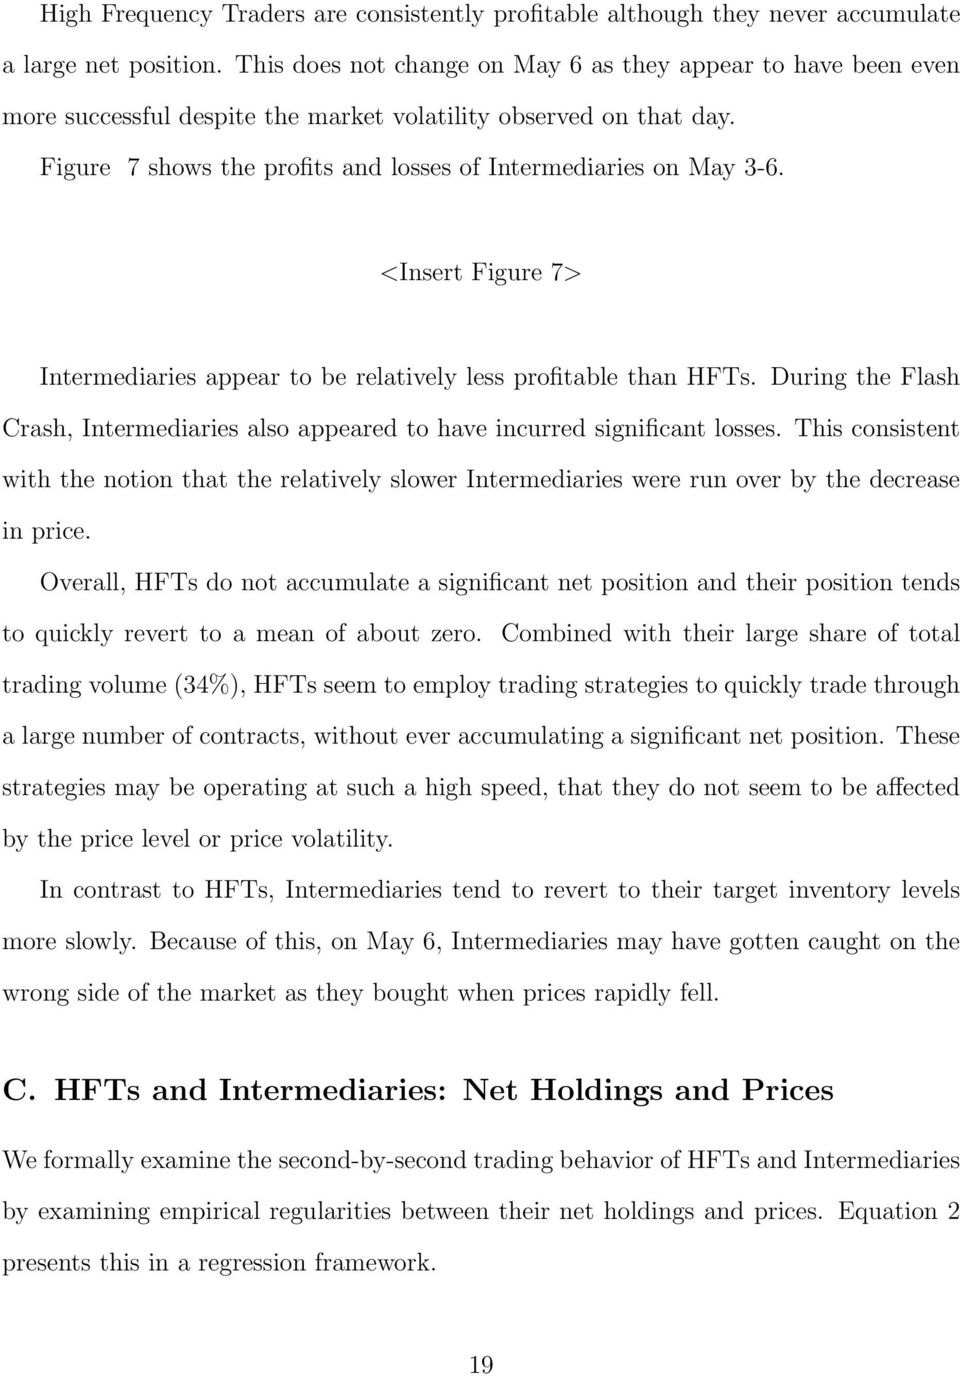 <Insert Figure 7> Intermediaries appear to be relatively less profitable than HFTs. During the Flash Crash, Intermediaries also appeared to have incurred significant losses.